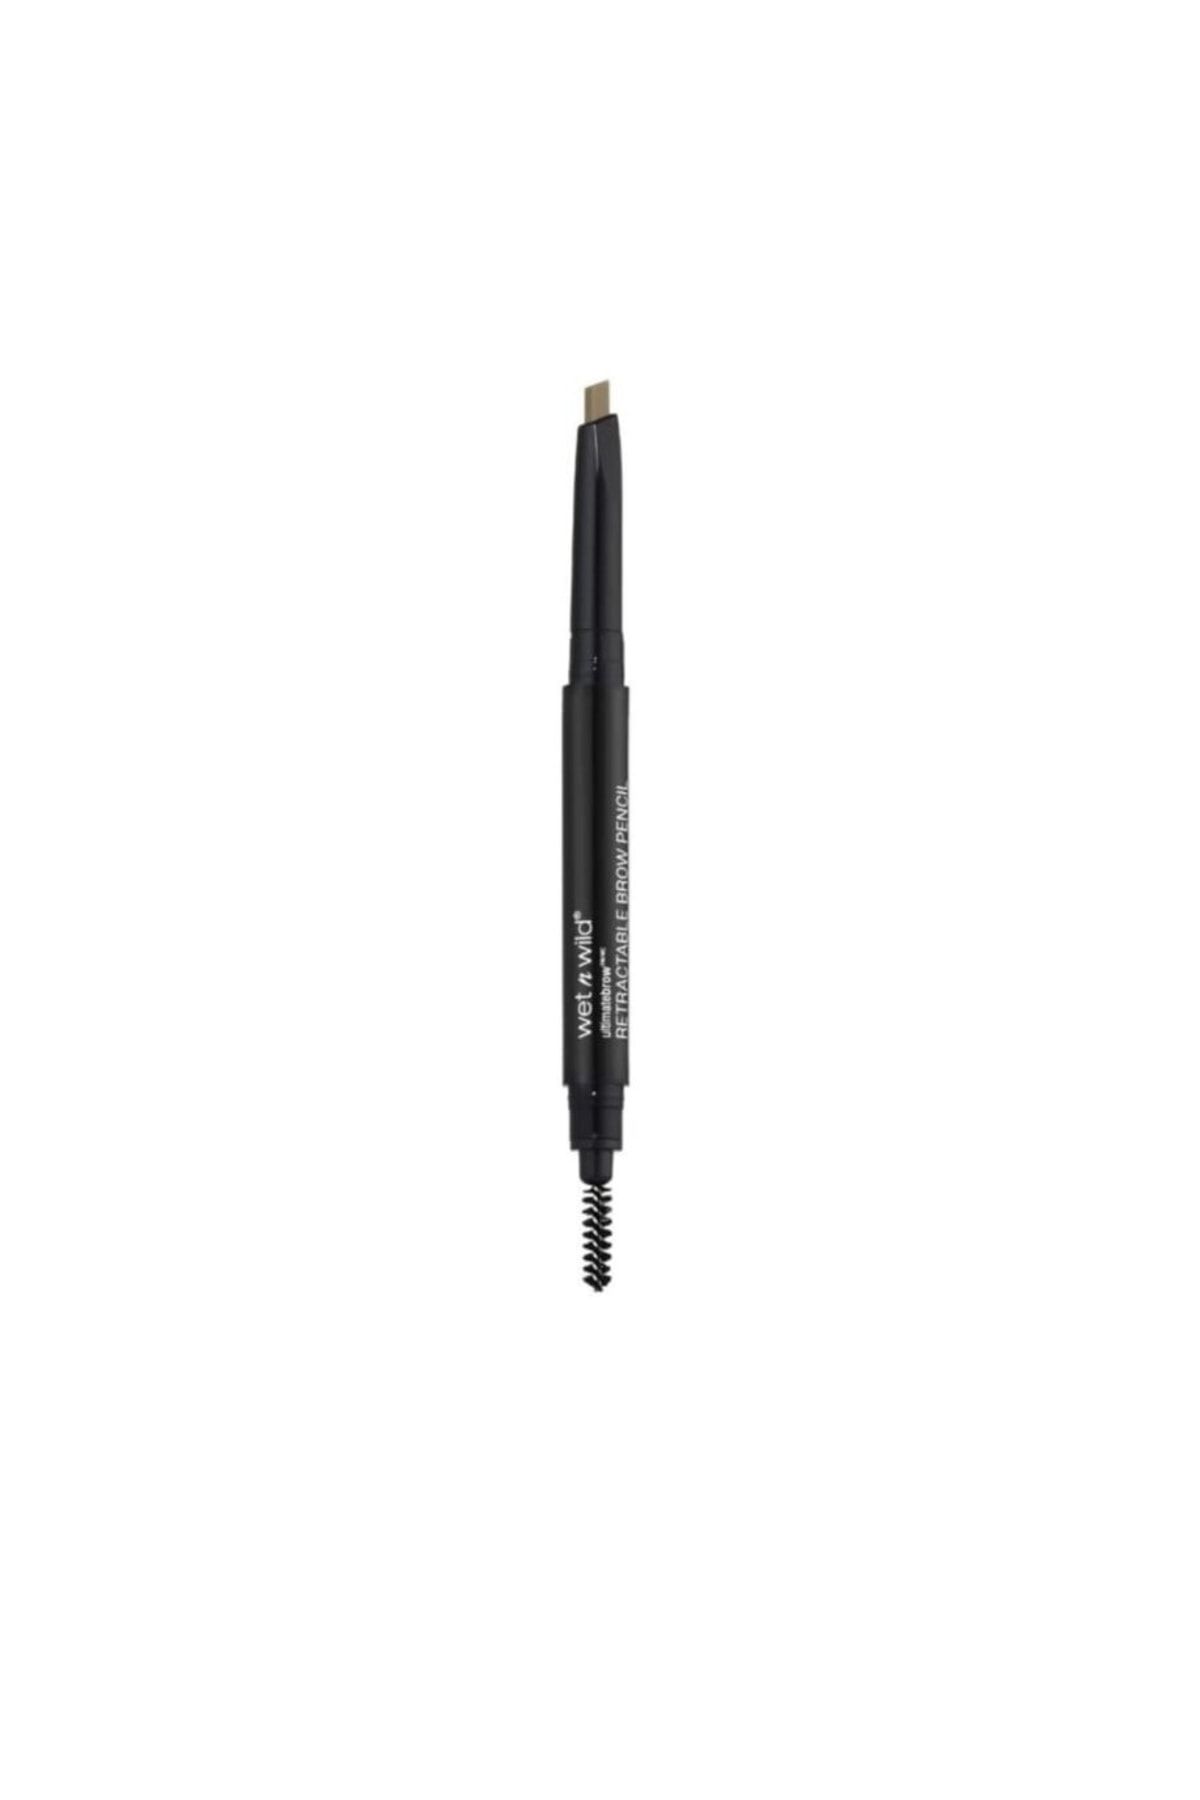 WET N WİLD Ultimate Retractable Brow Pencil Kaş Kalemi Taupe E625a